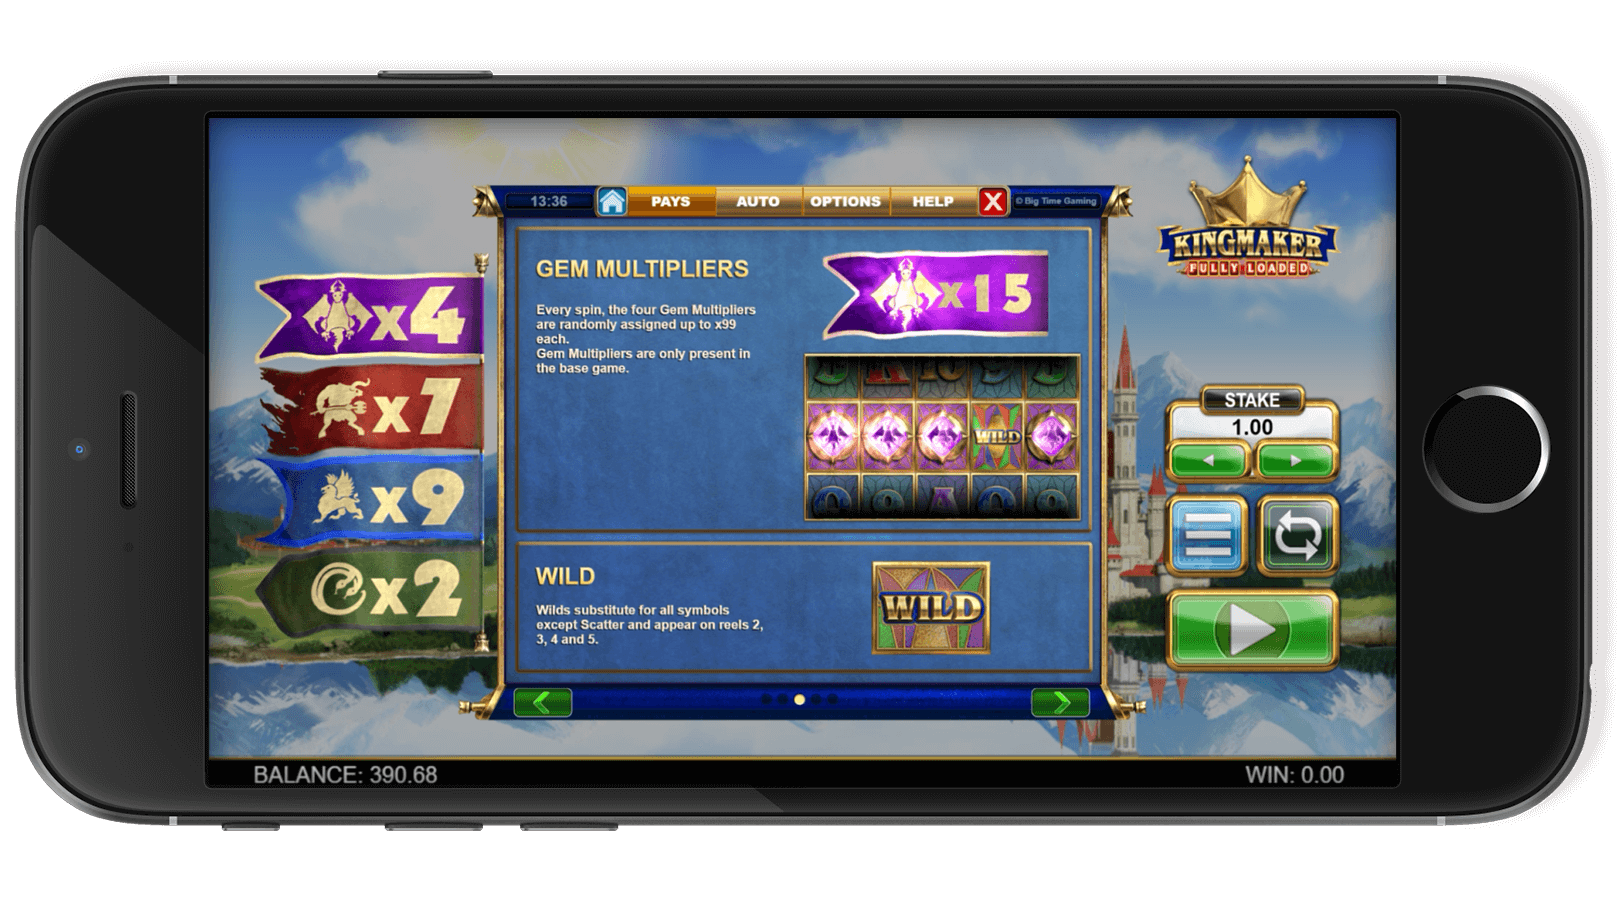 KingMaker_FullyLoaded_05_Paytable3_mobile.png